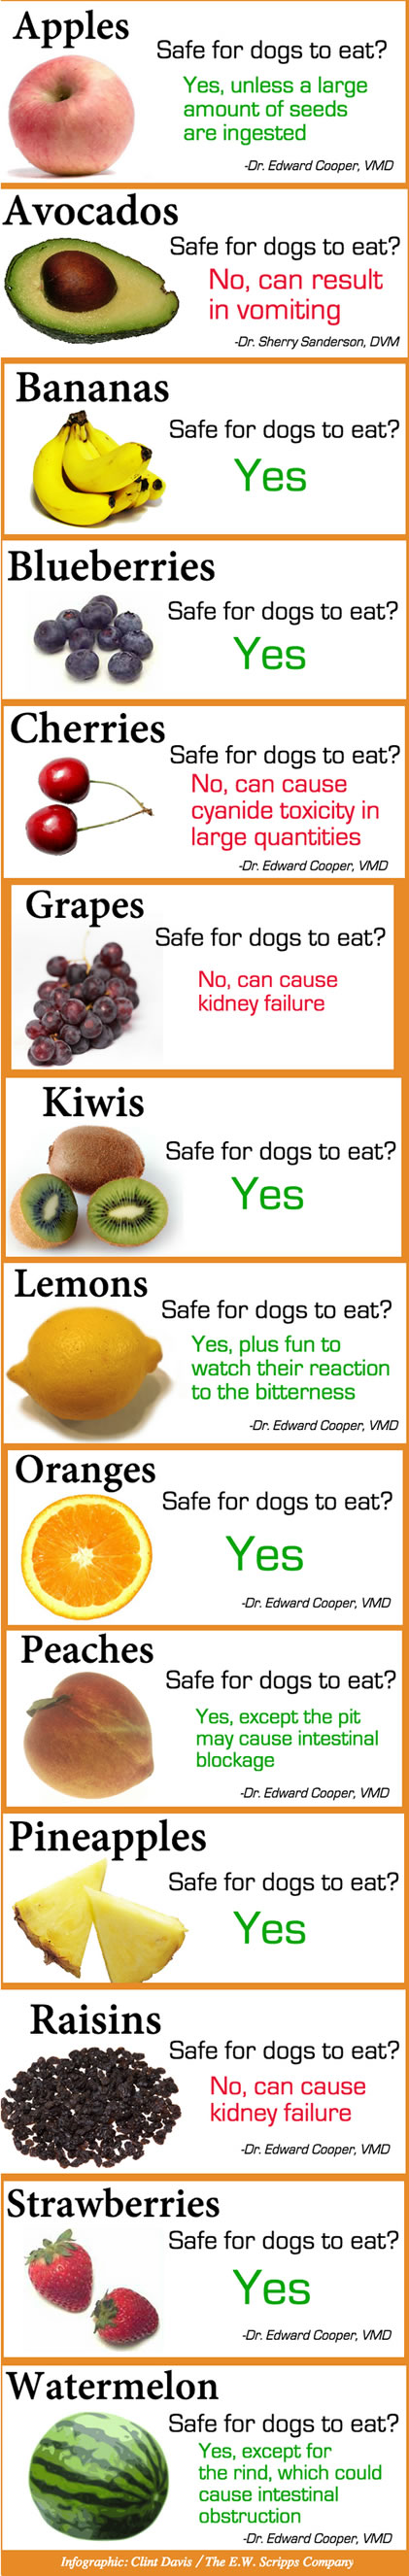 fruits and veggies-dogs